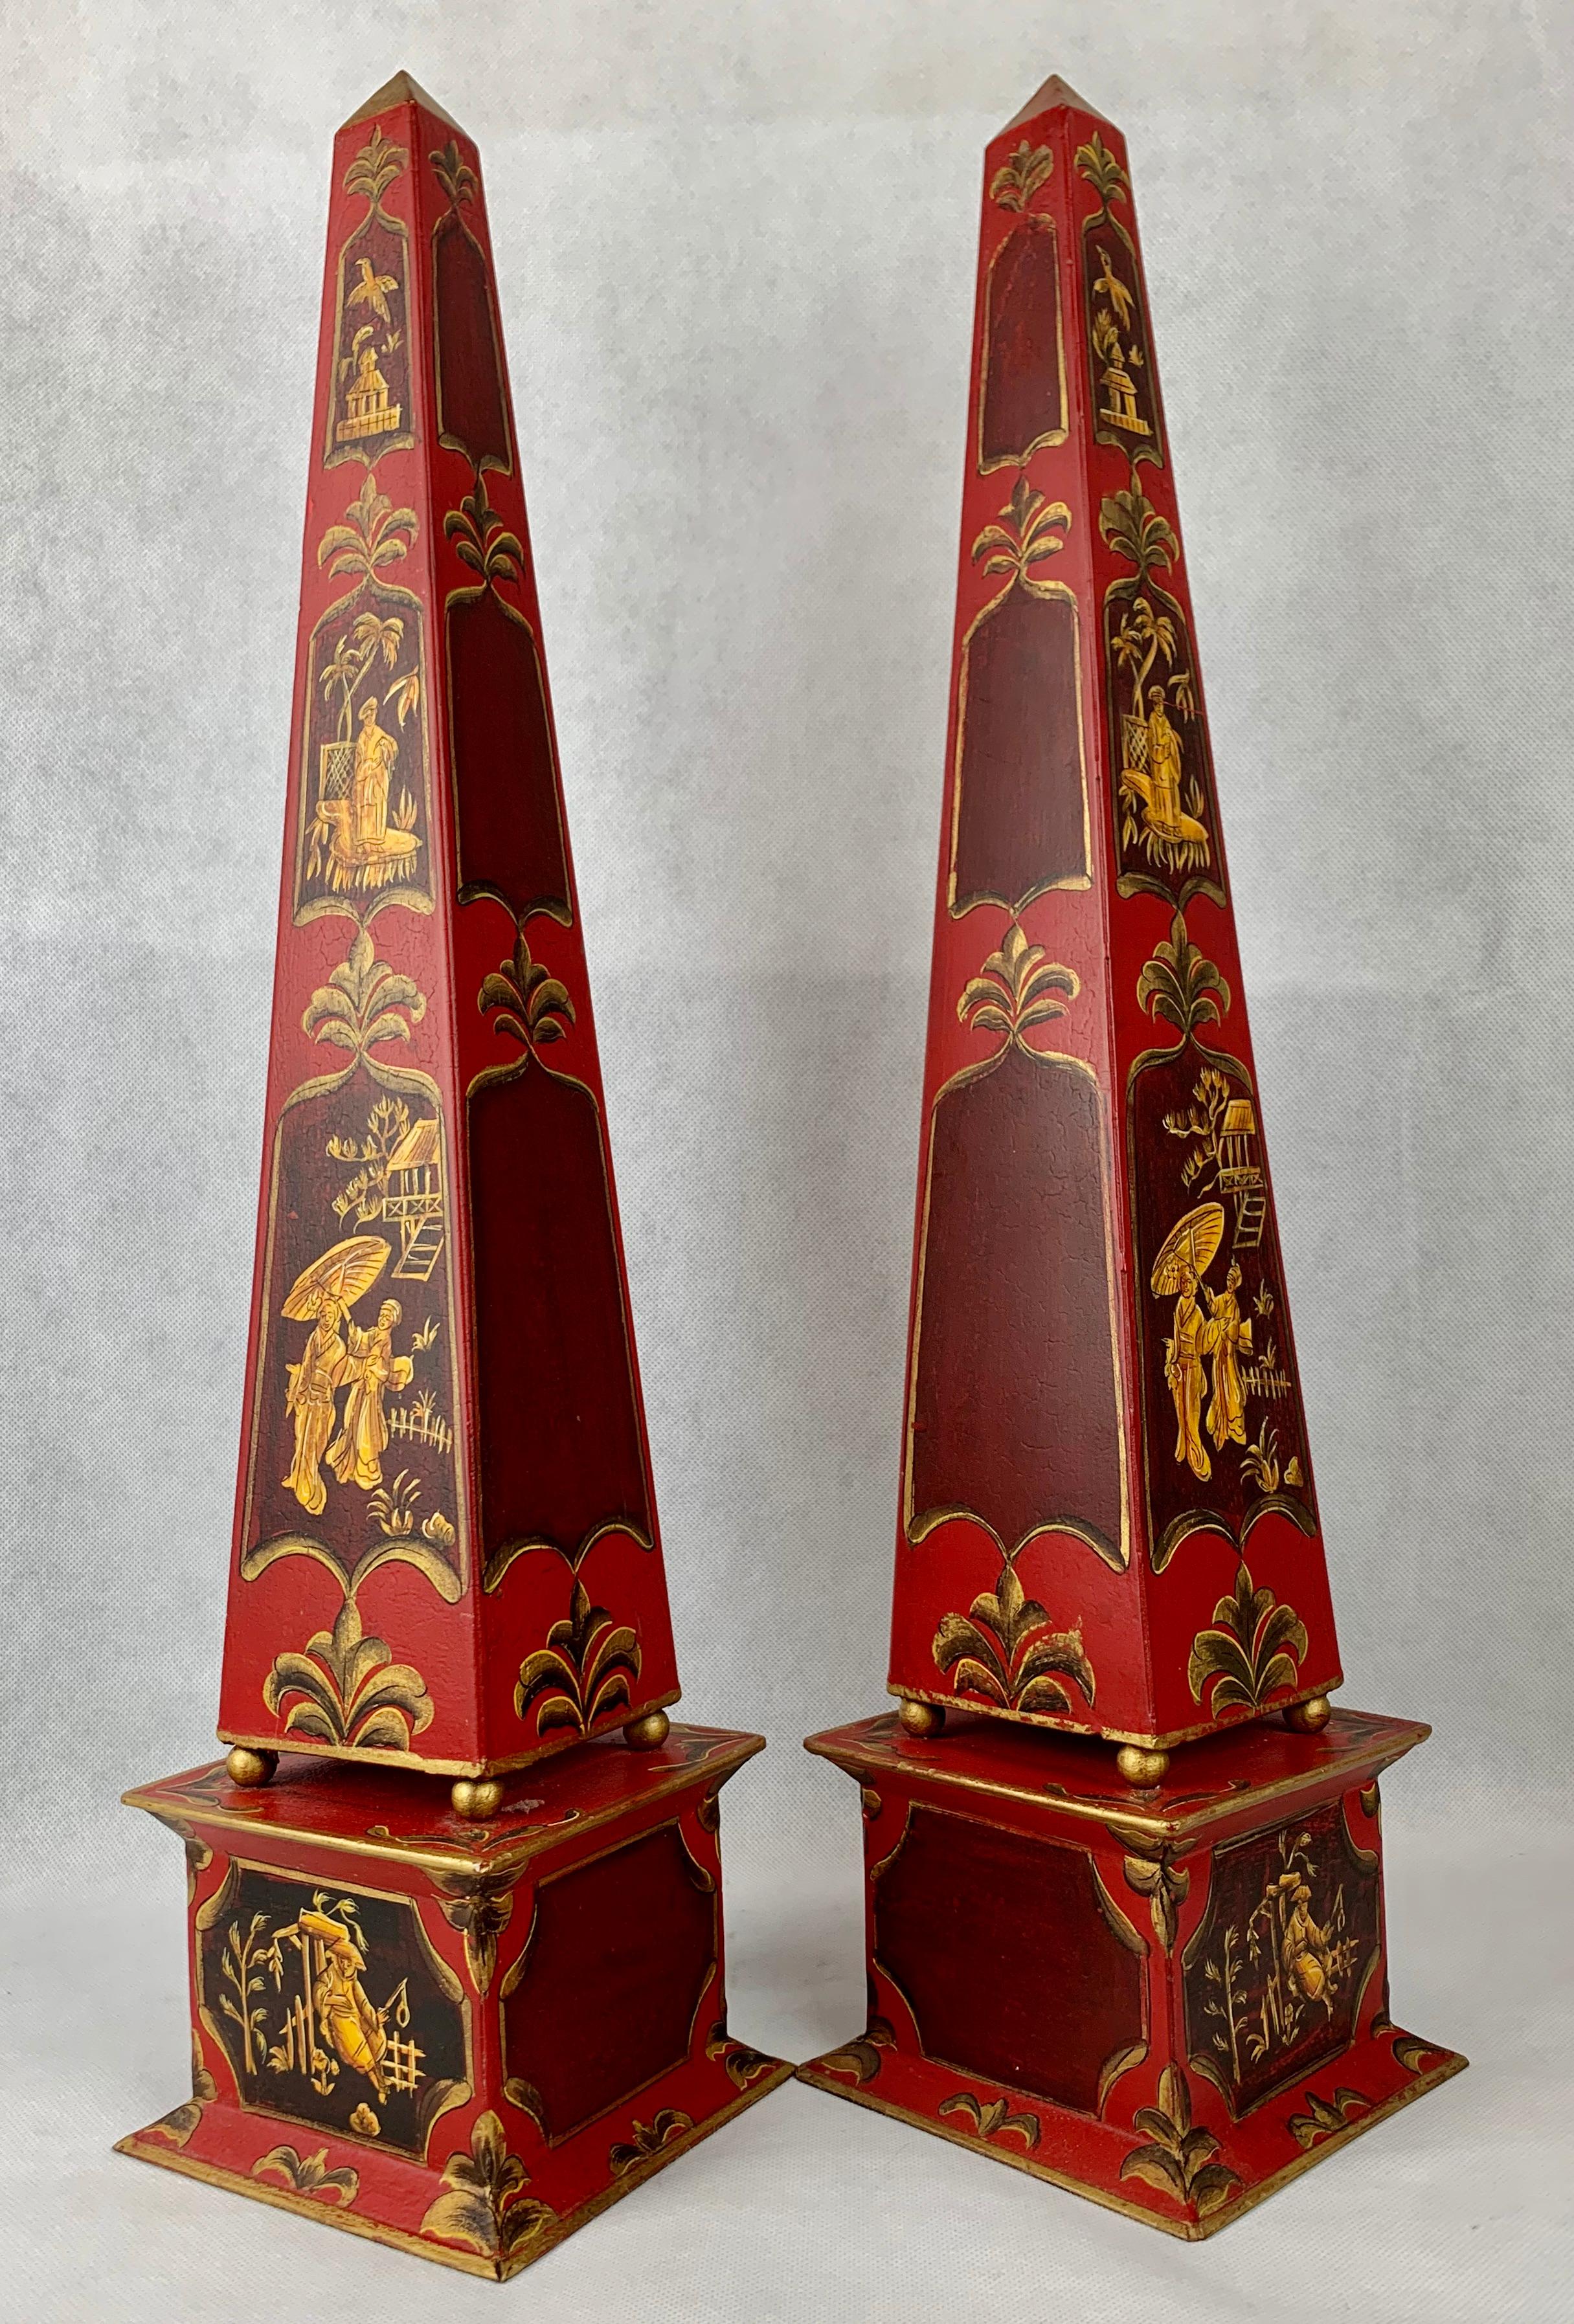 Pair of hand painted tôle obelisks with a chinoiserie motif. Two sides are paneled with figures and scenes. The other two sides have solid painted panels. There are no dents or cracks.

Measures: Height 22.25